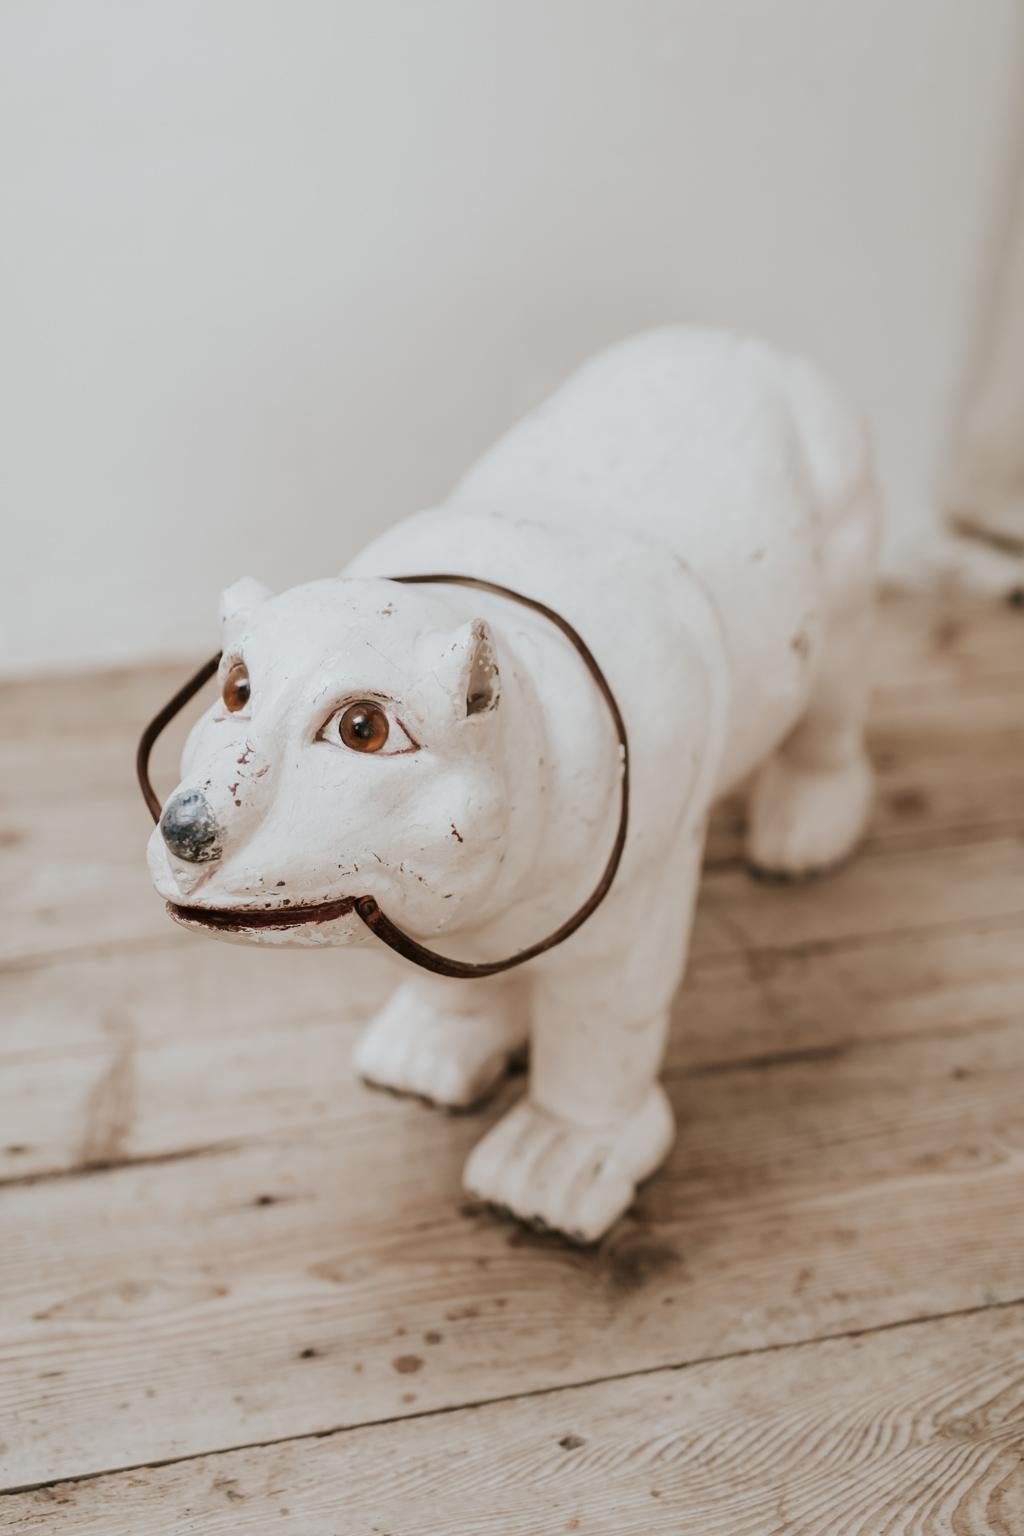 Art Forain/Folk Art, this carved wood circus polar bear is a unique find, extremely rare and quirky. Great expression, glass eyes.